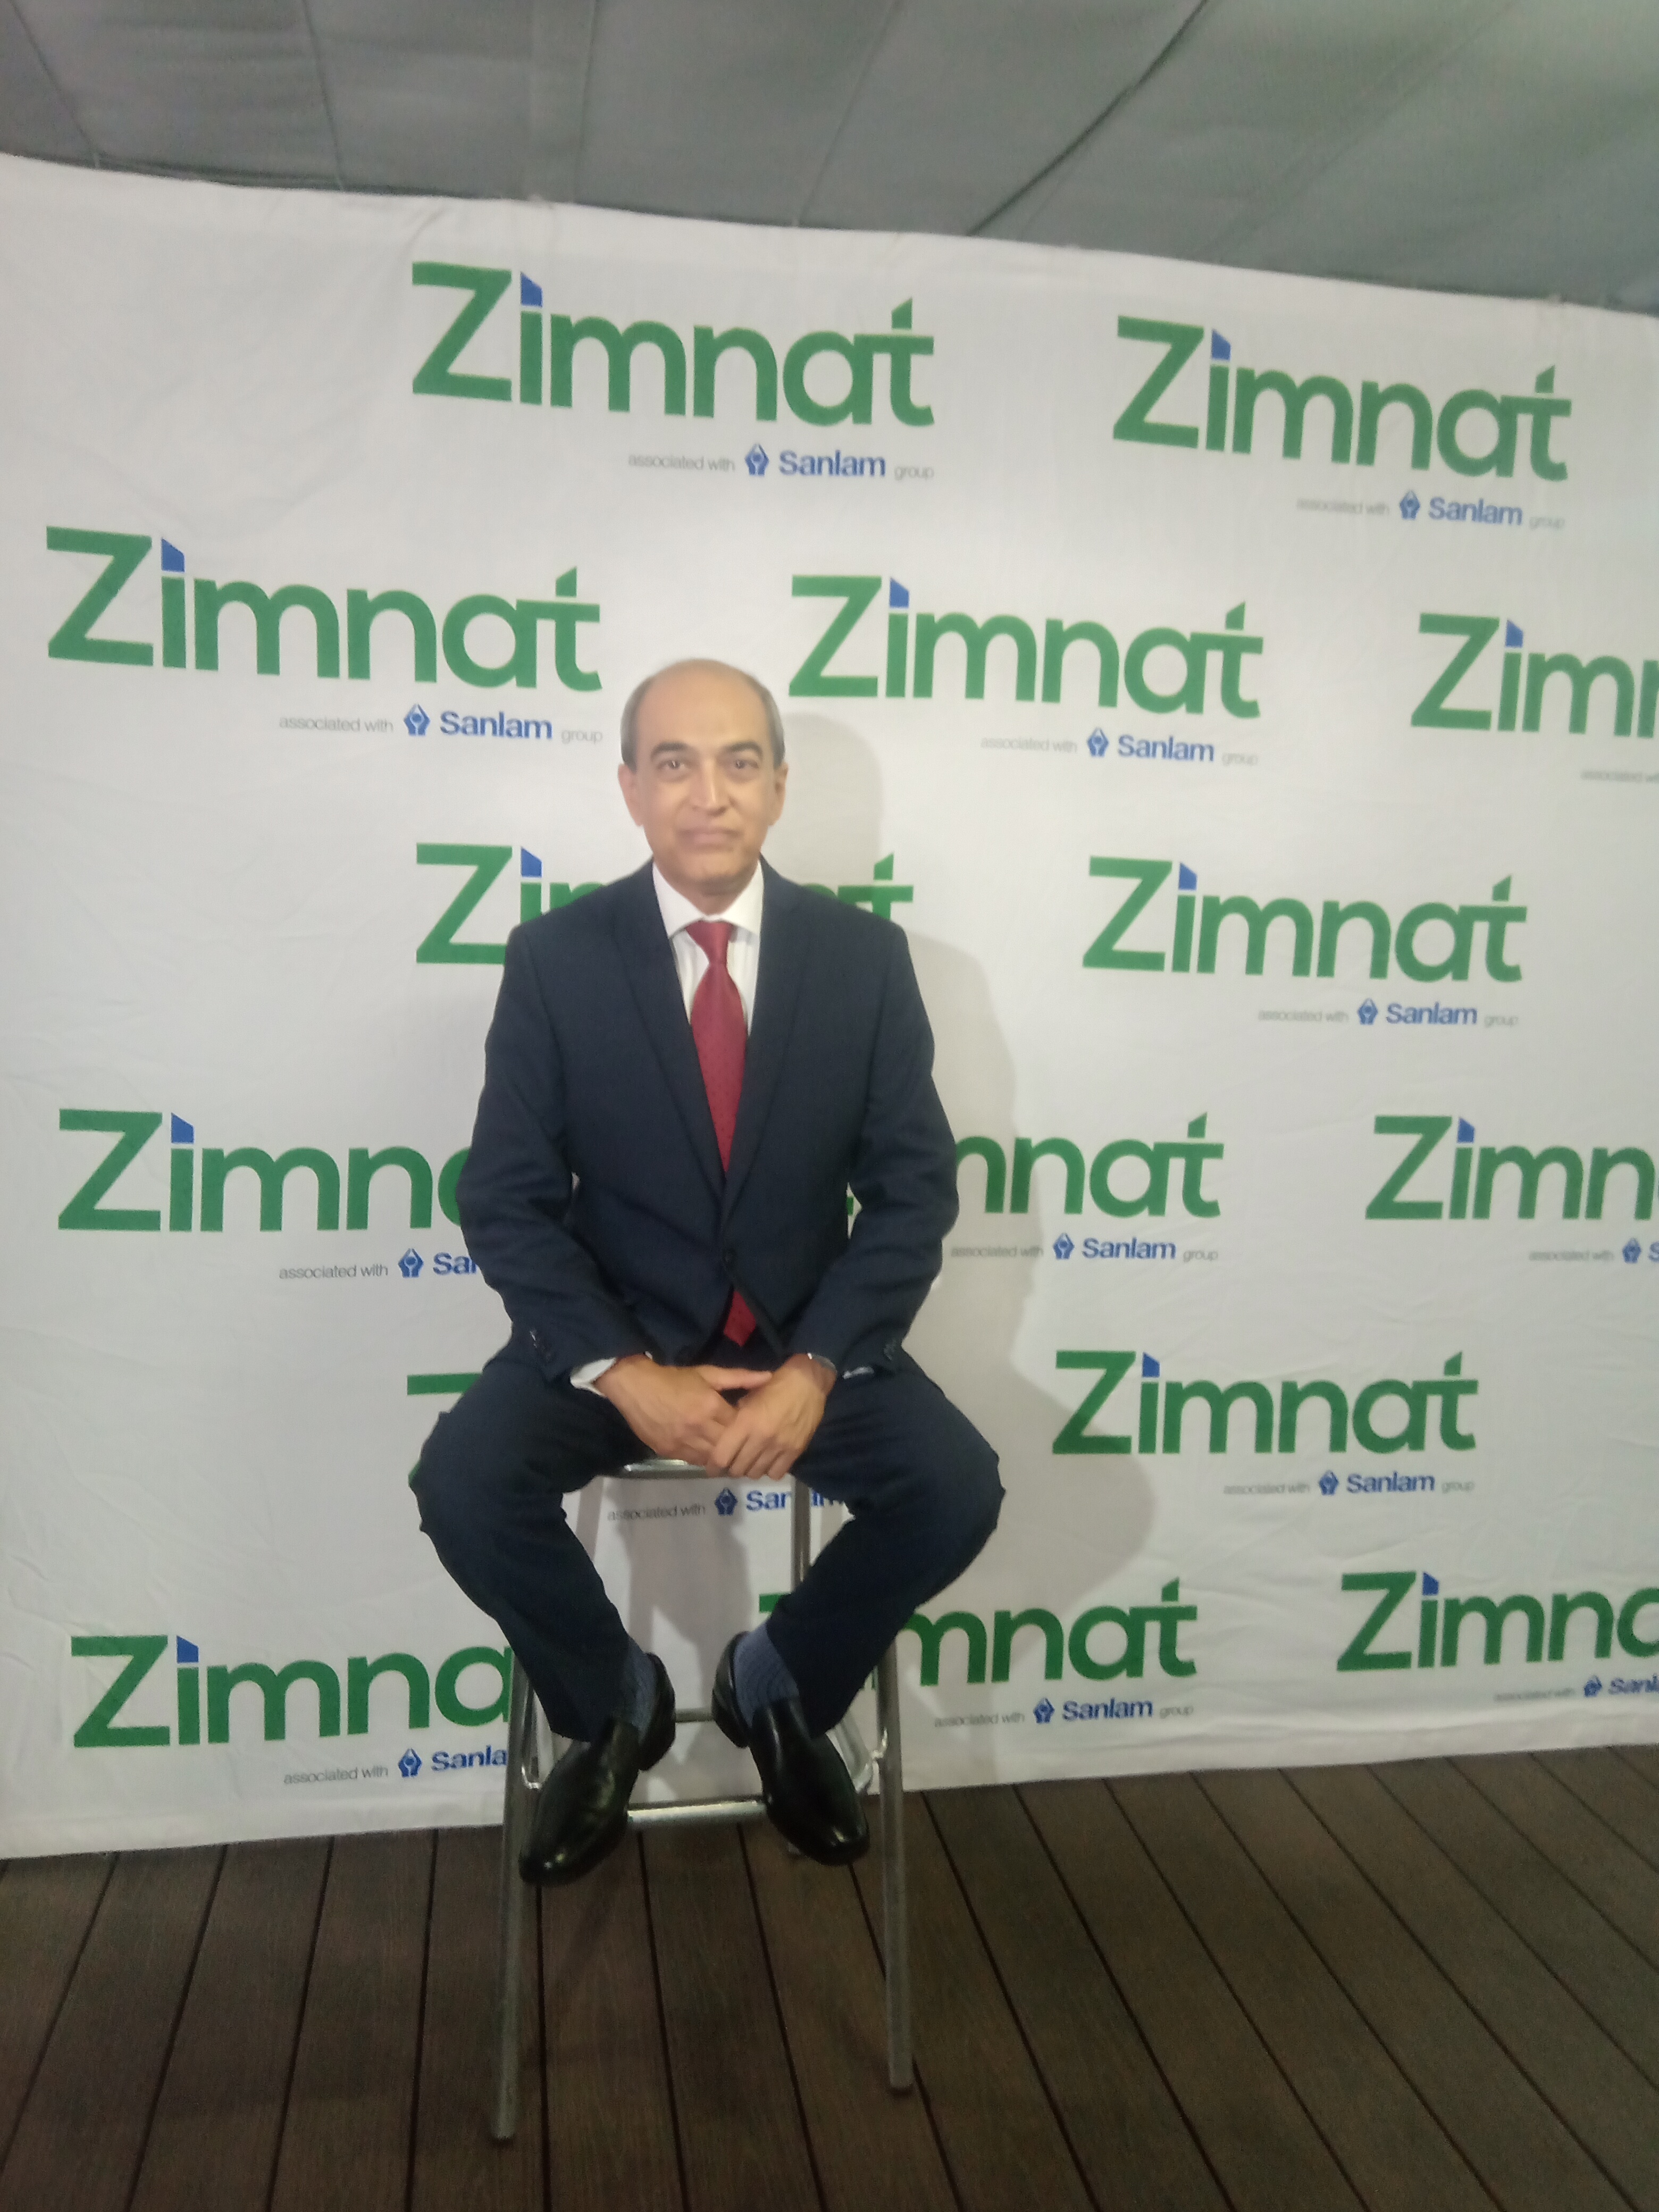 Zimnat rewards excelling sales agents and staff